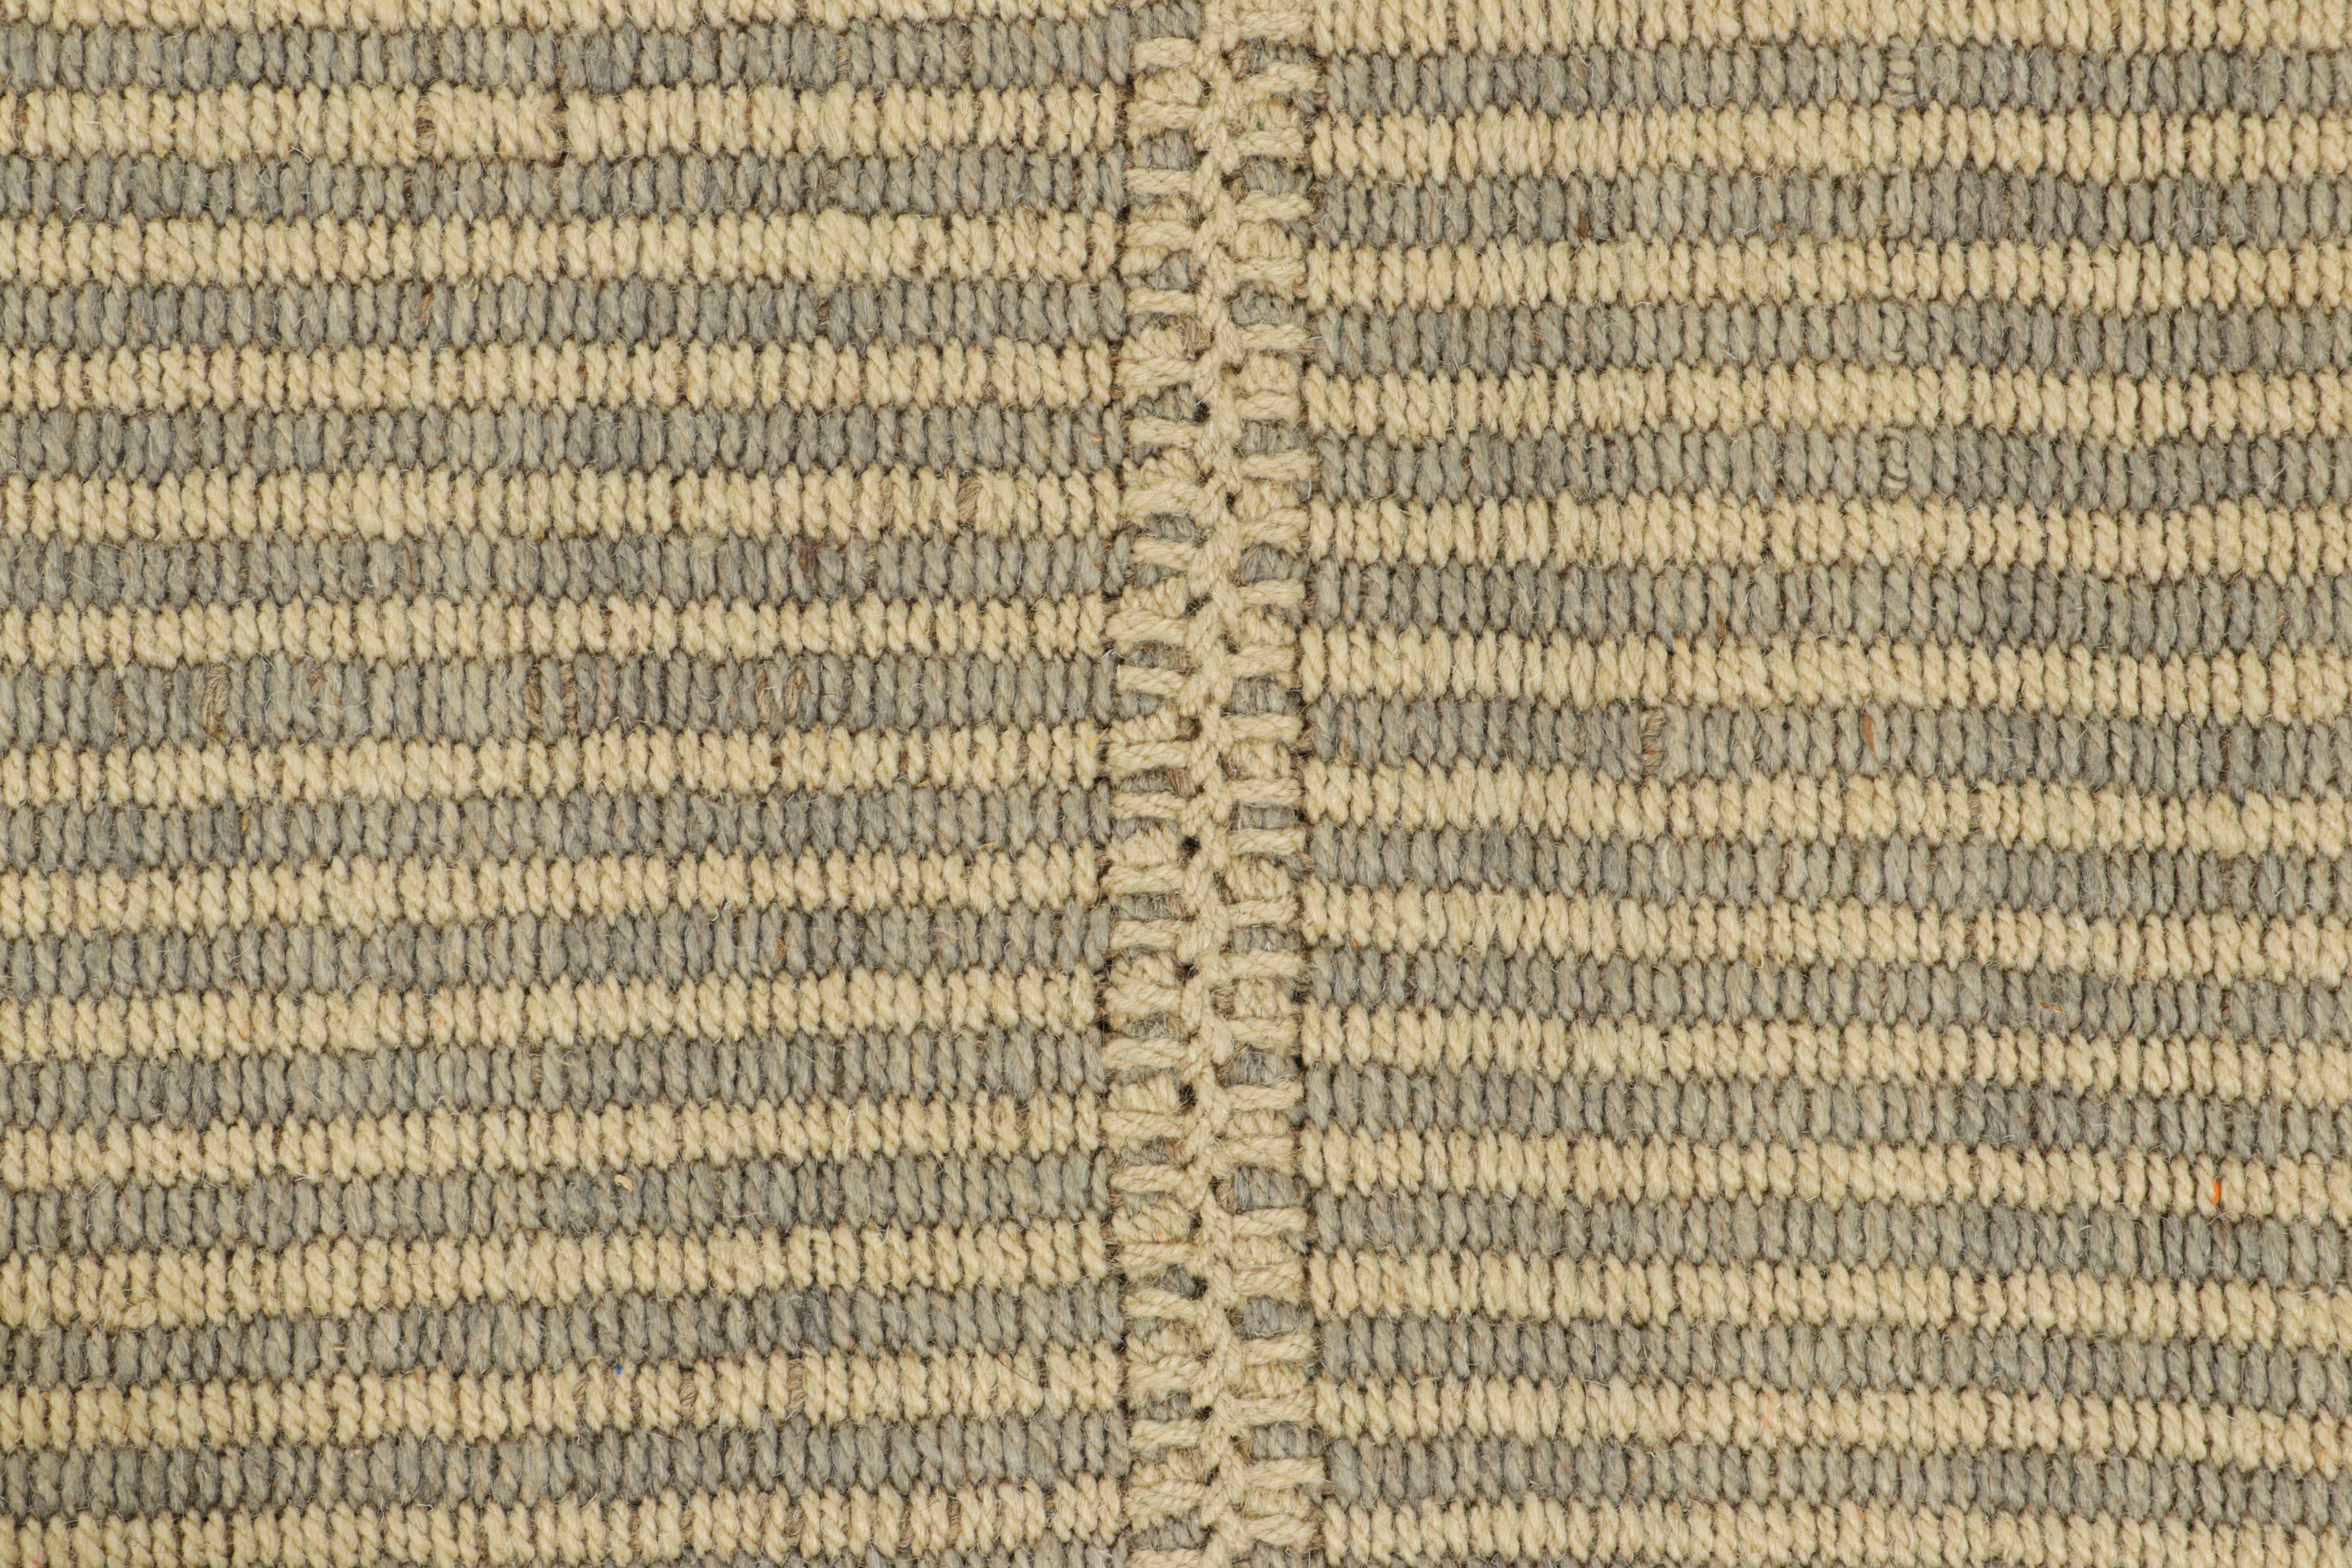 Modern Rug & Kilim’s Contemporary Kilim in Beige and Gray Textural Stripes For Sale